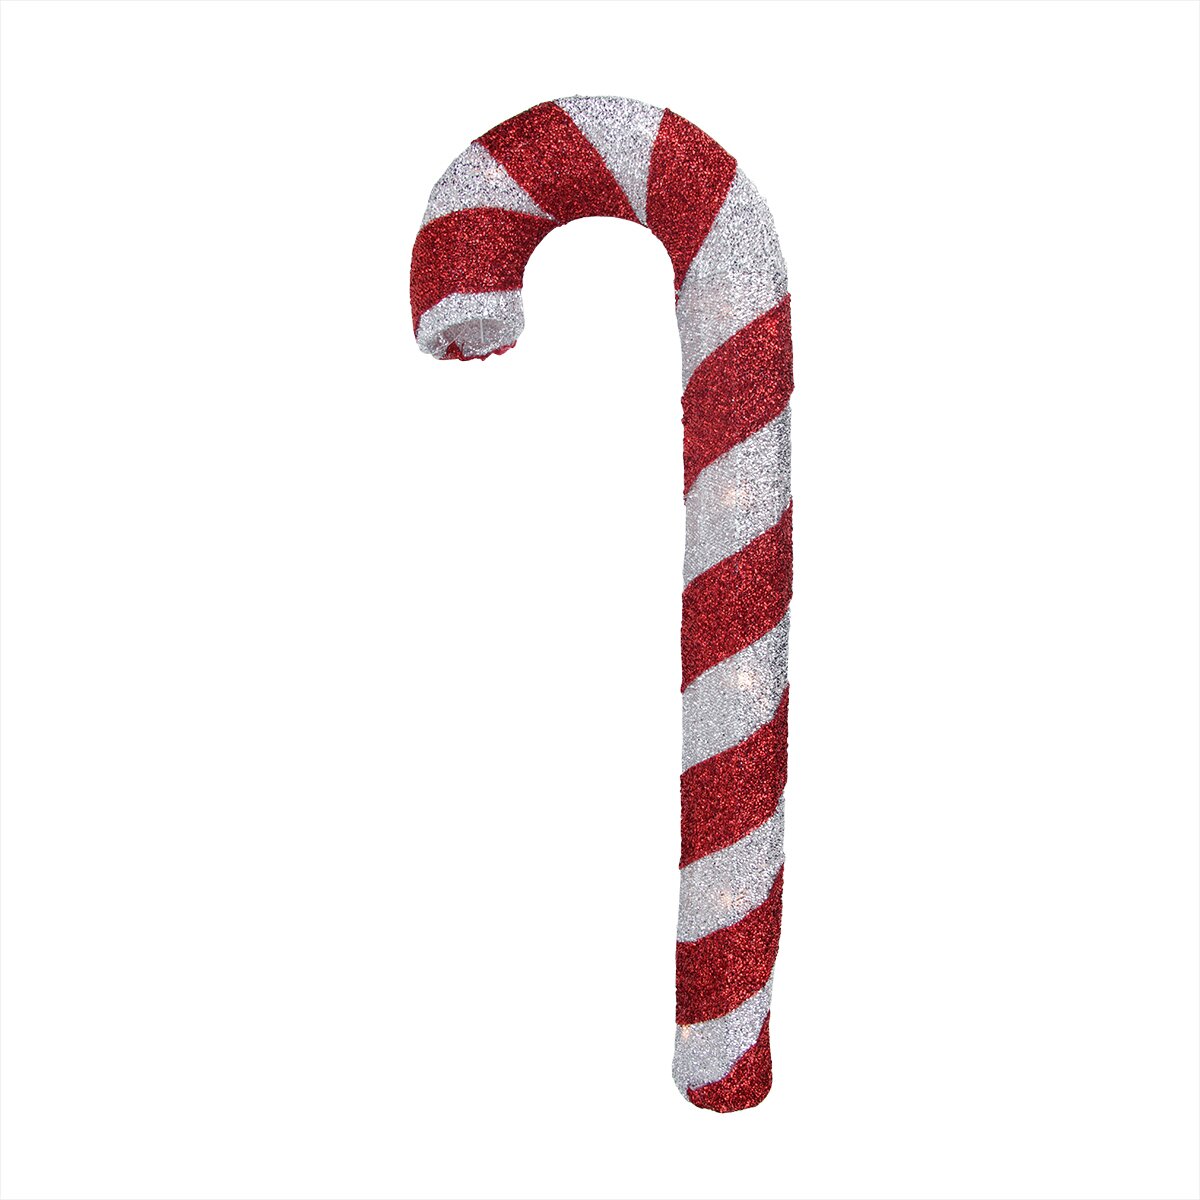 Candy Cane Outdoor Decorations 40